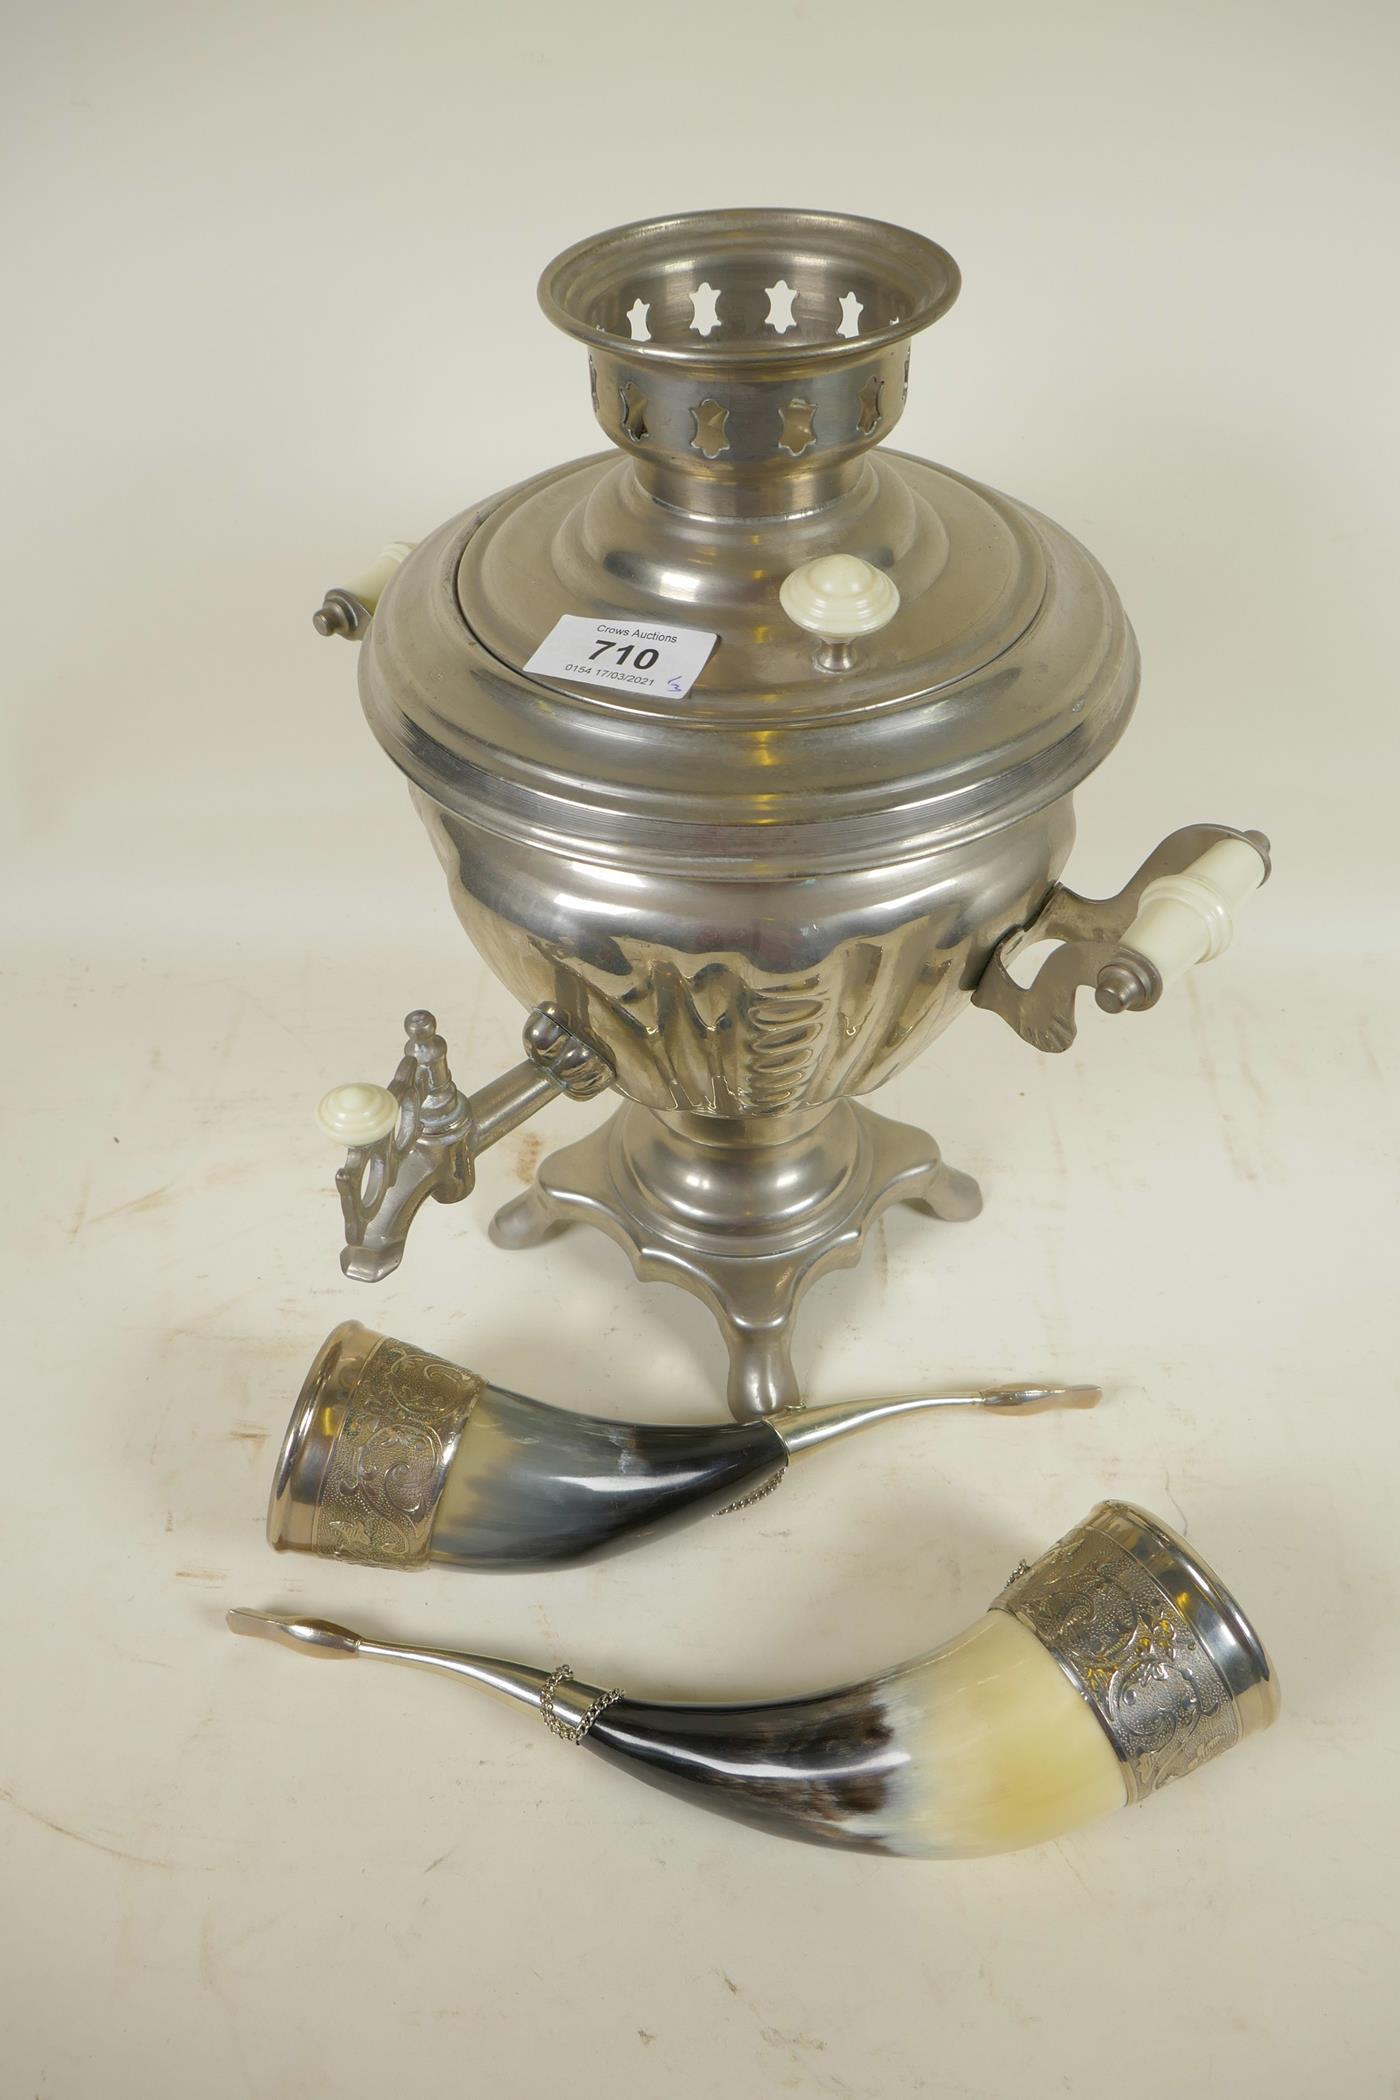 A pair of silver plate mounted horns with scroll decoration, 10" long, together with a silver plated